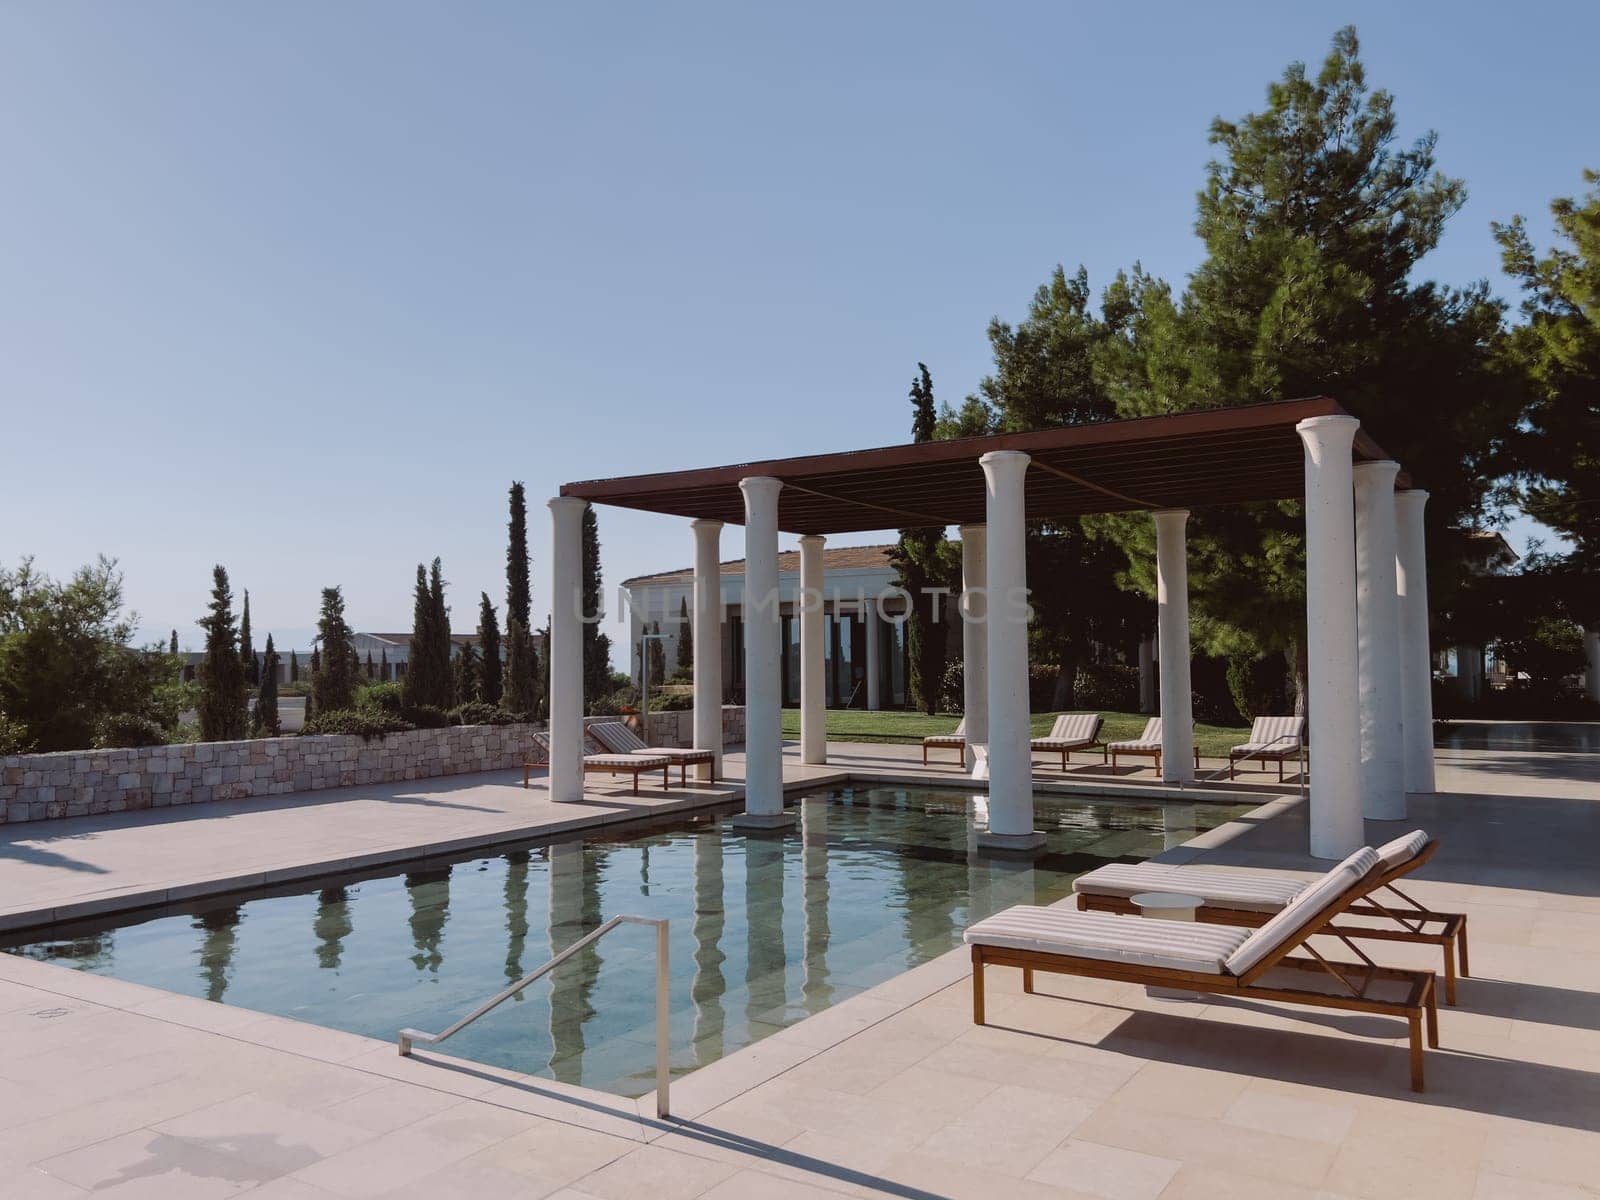 Pergola with columns near the pool with sun loungers surrounded by trees. Hotel Amanzoe, Greece by Nadtochiy